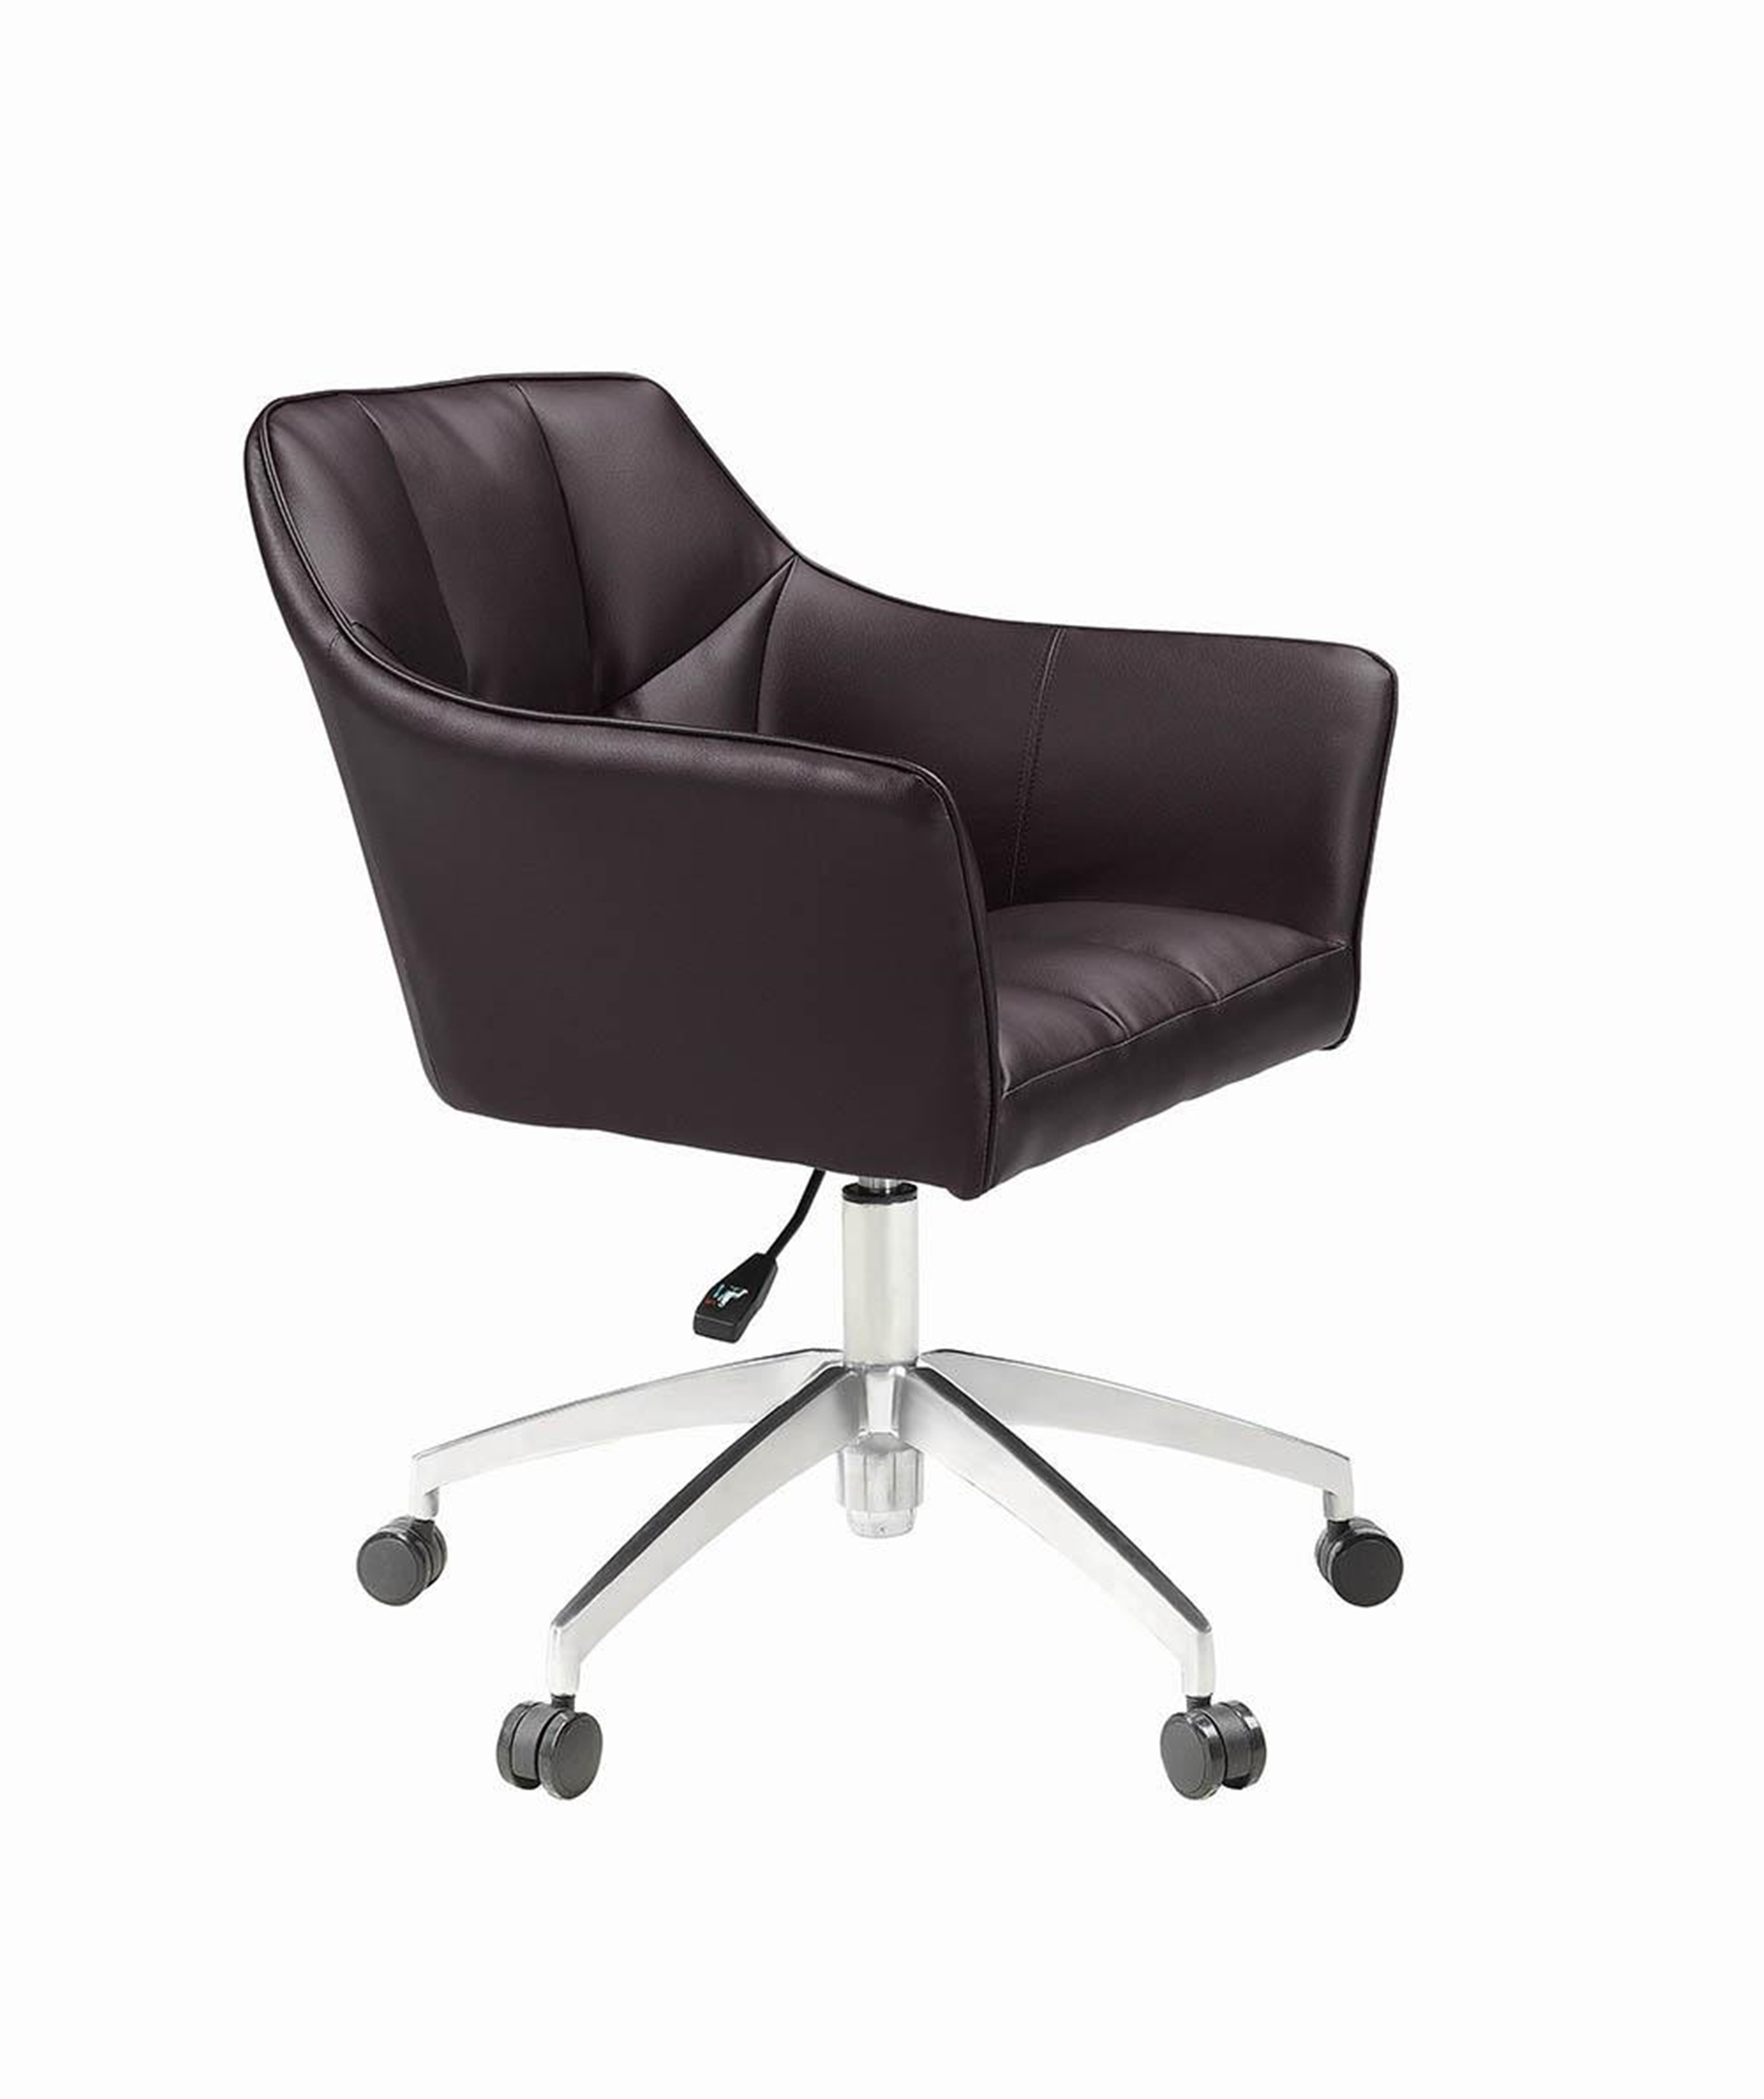 Modern Brown Upholstered Office Chair